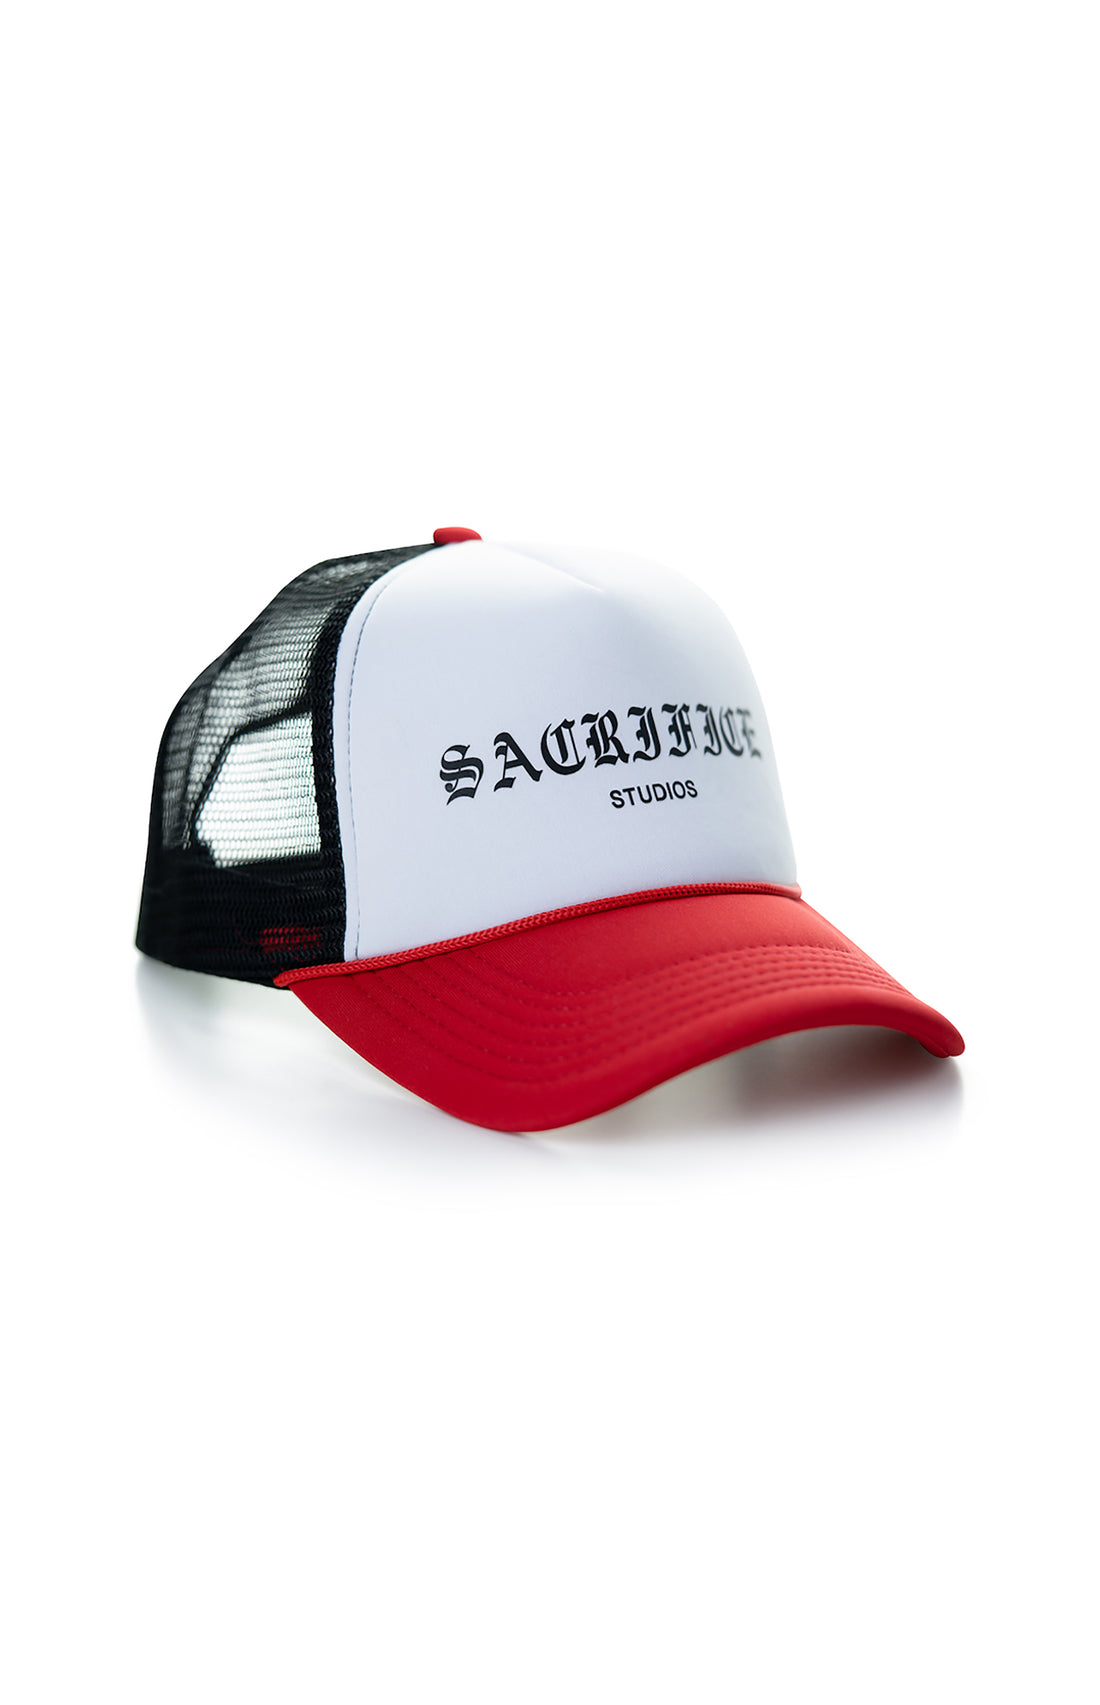 A sleek and stylish trucker hat with bold black graphic print. Expertly crafted in Portugal with high-quality materials for durability. Easy to maintain, simply machine wash and hang to dry. Elevate your fashion game with this unique and fashionable accessory.